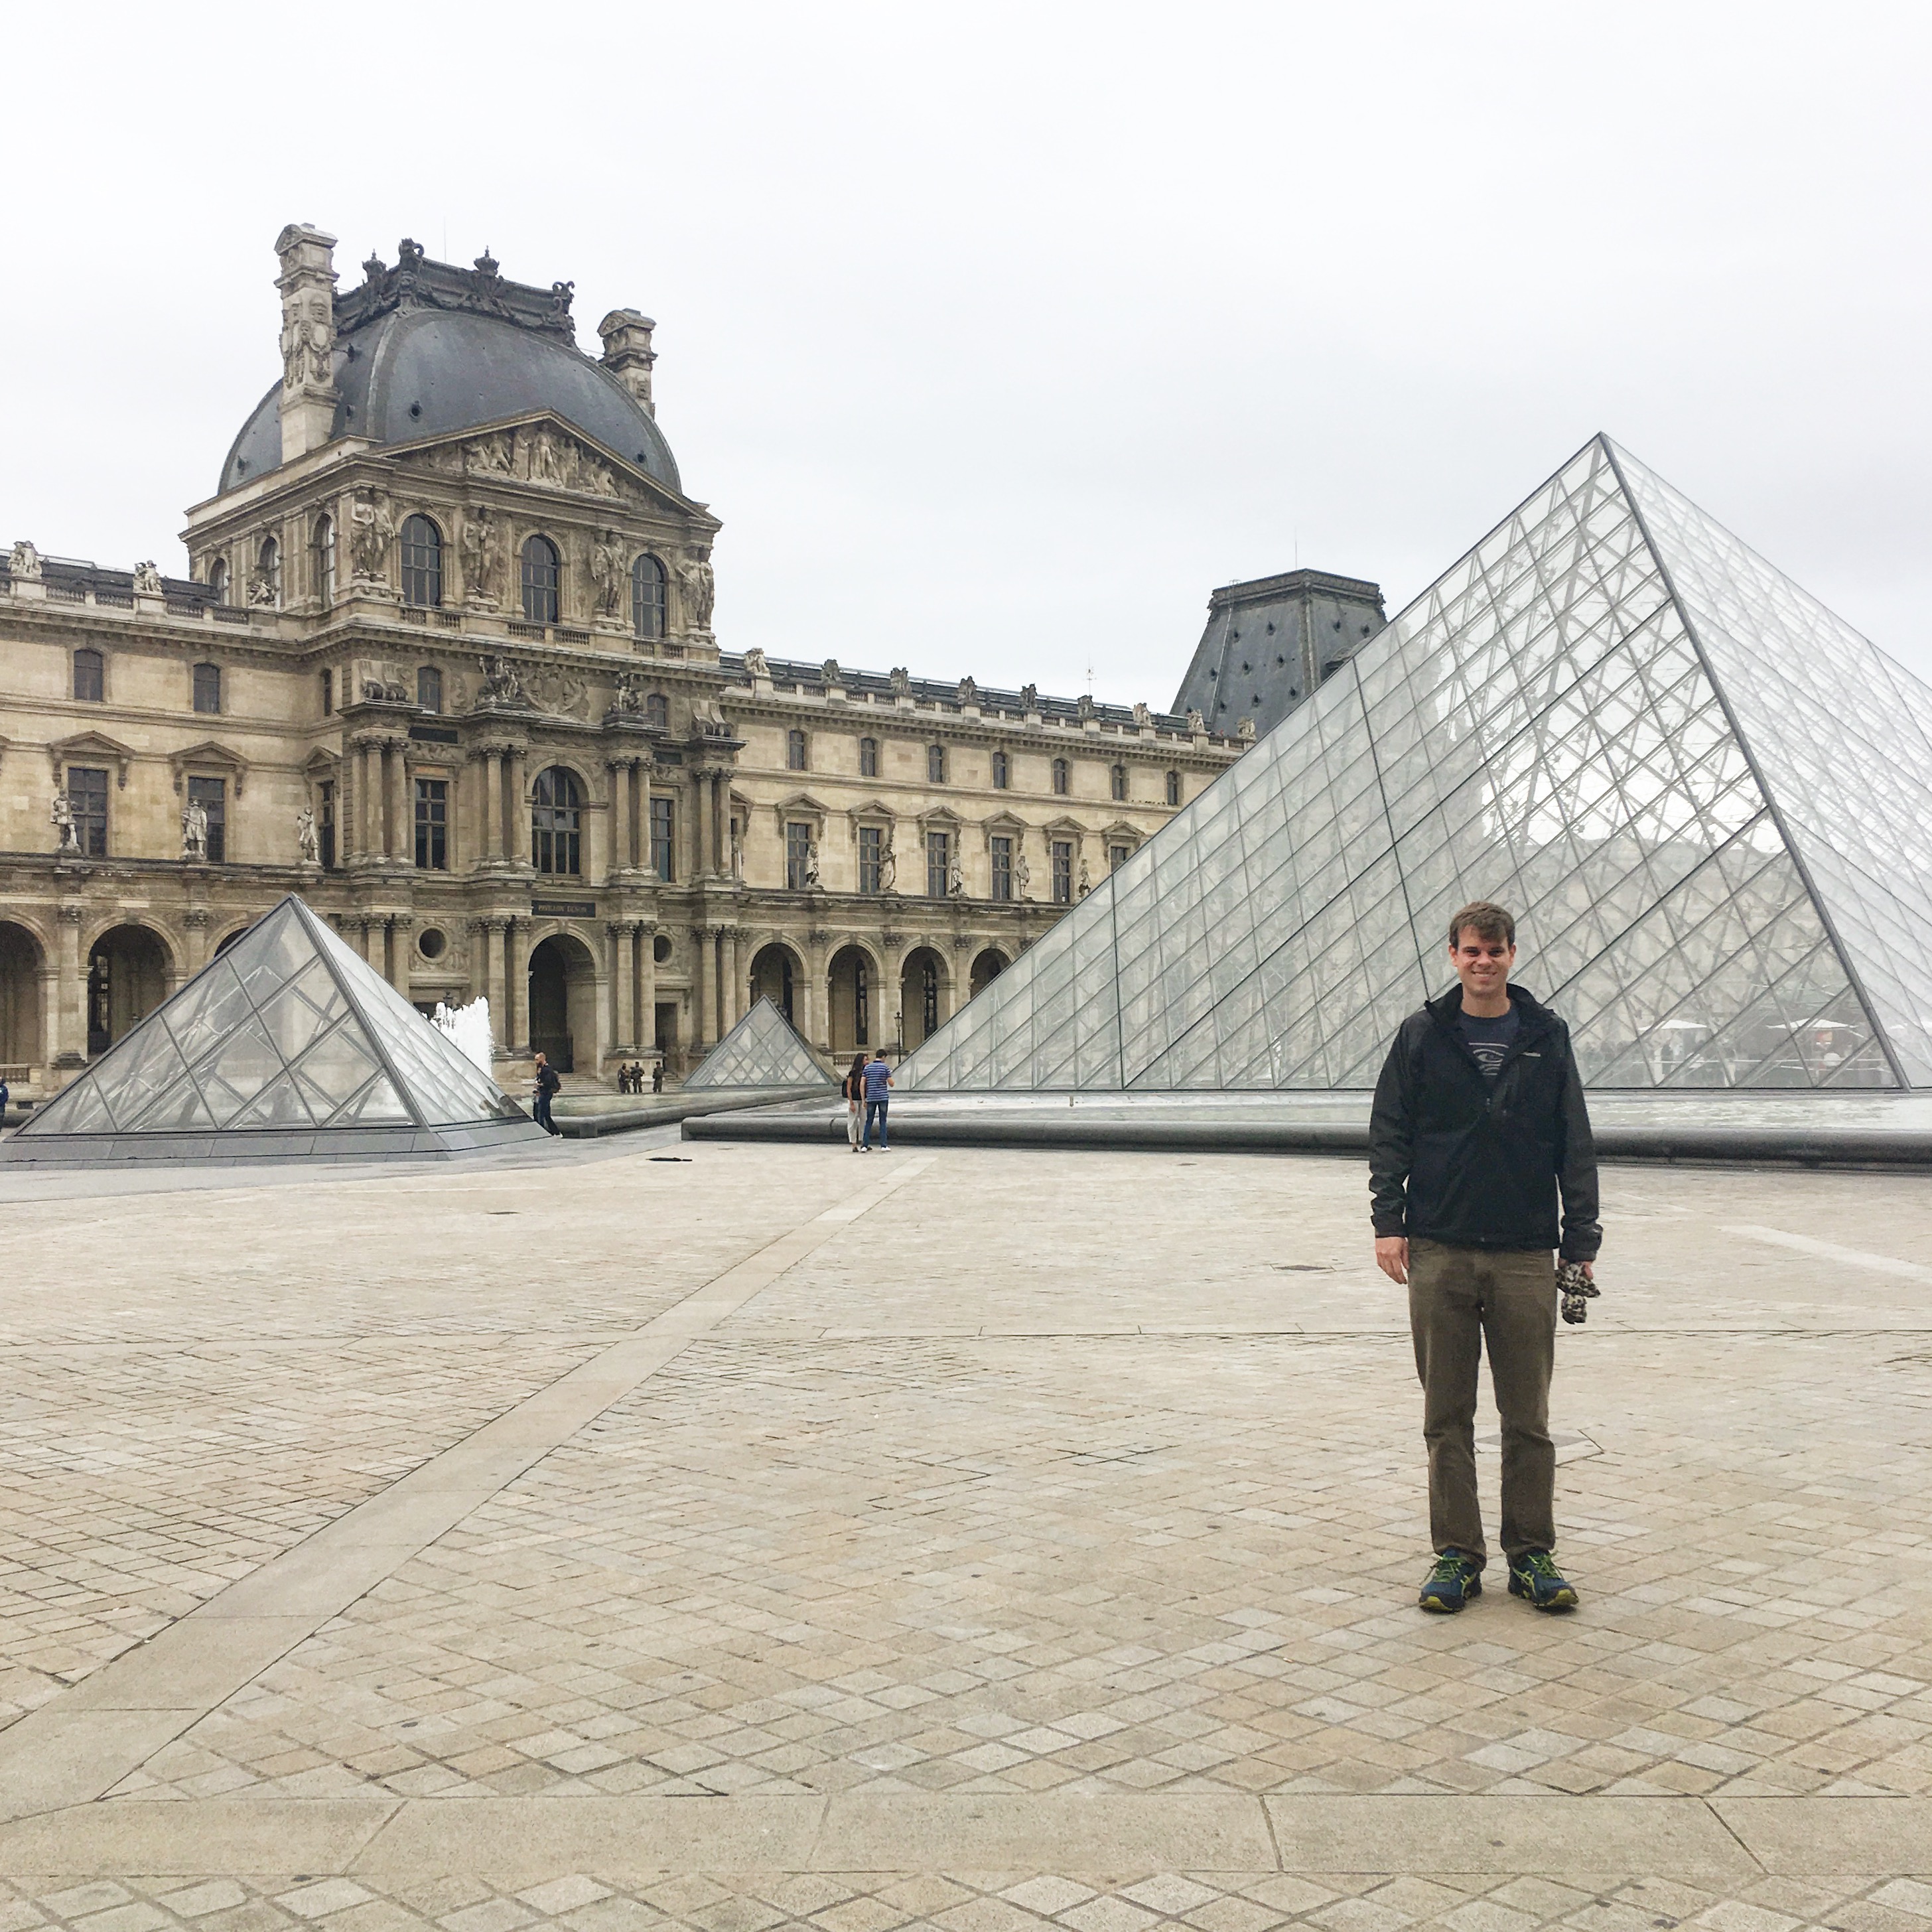 Alone at the Louvre Museum in Paris